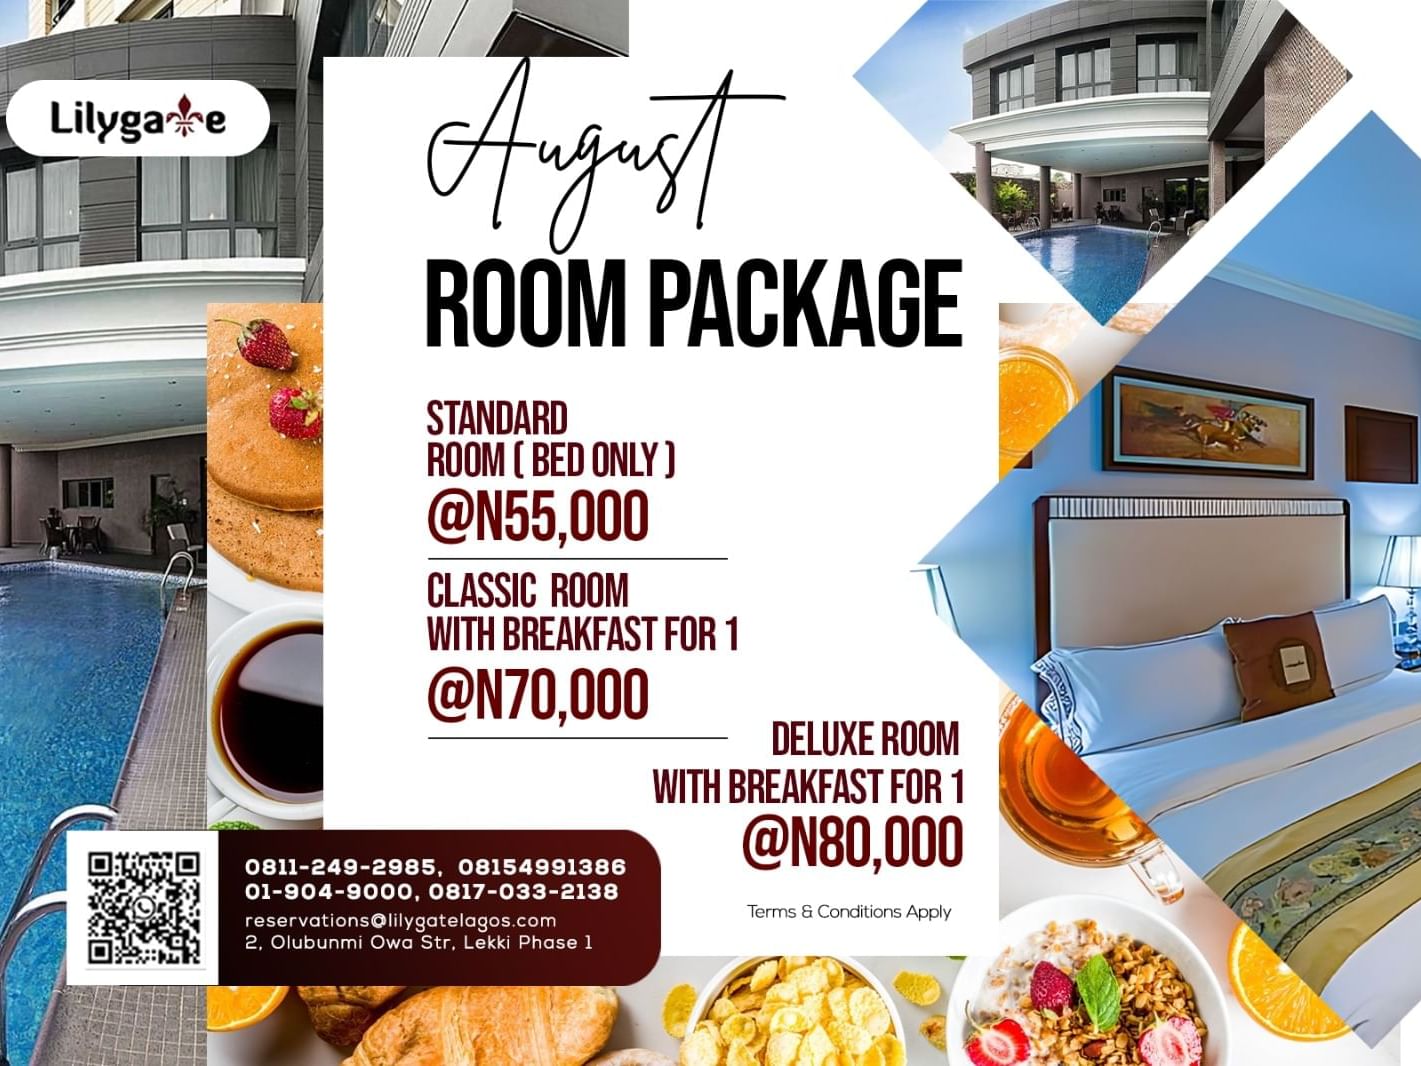 Lilygate hotel room with breakfast for one person prices are N55,000 standard room, N70,000 classic room, N80,000 deluxe room